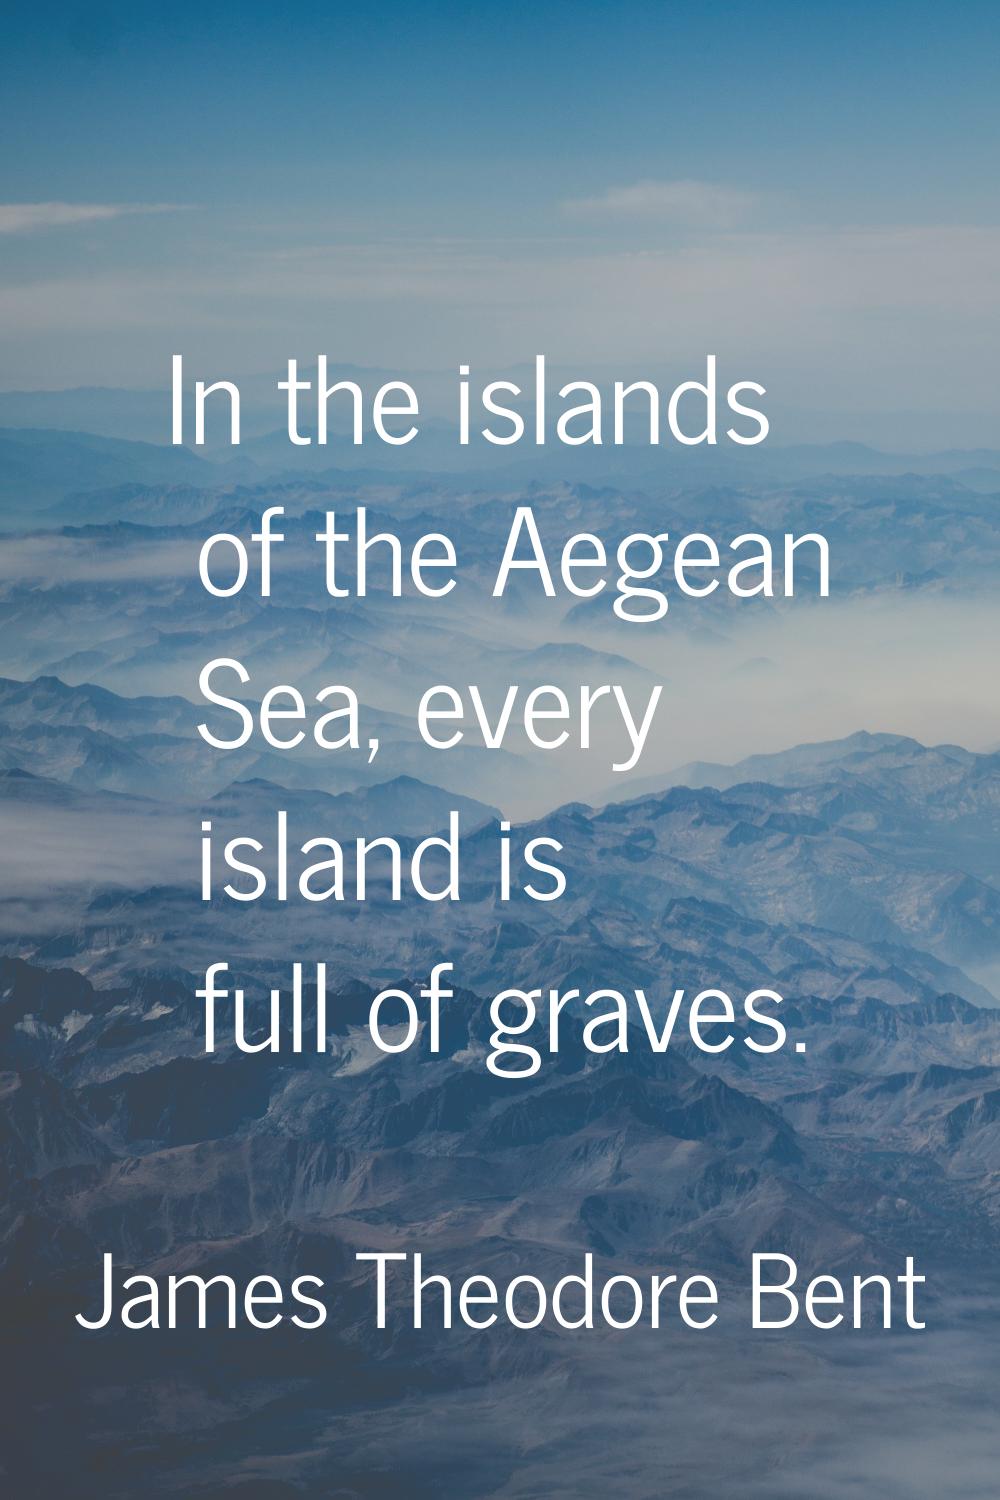 In the islands of the Aegean Sea, every island is full of graves.